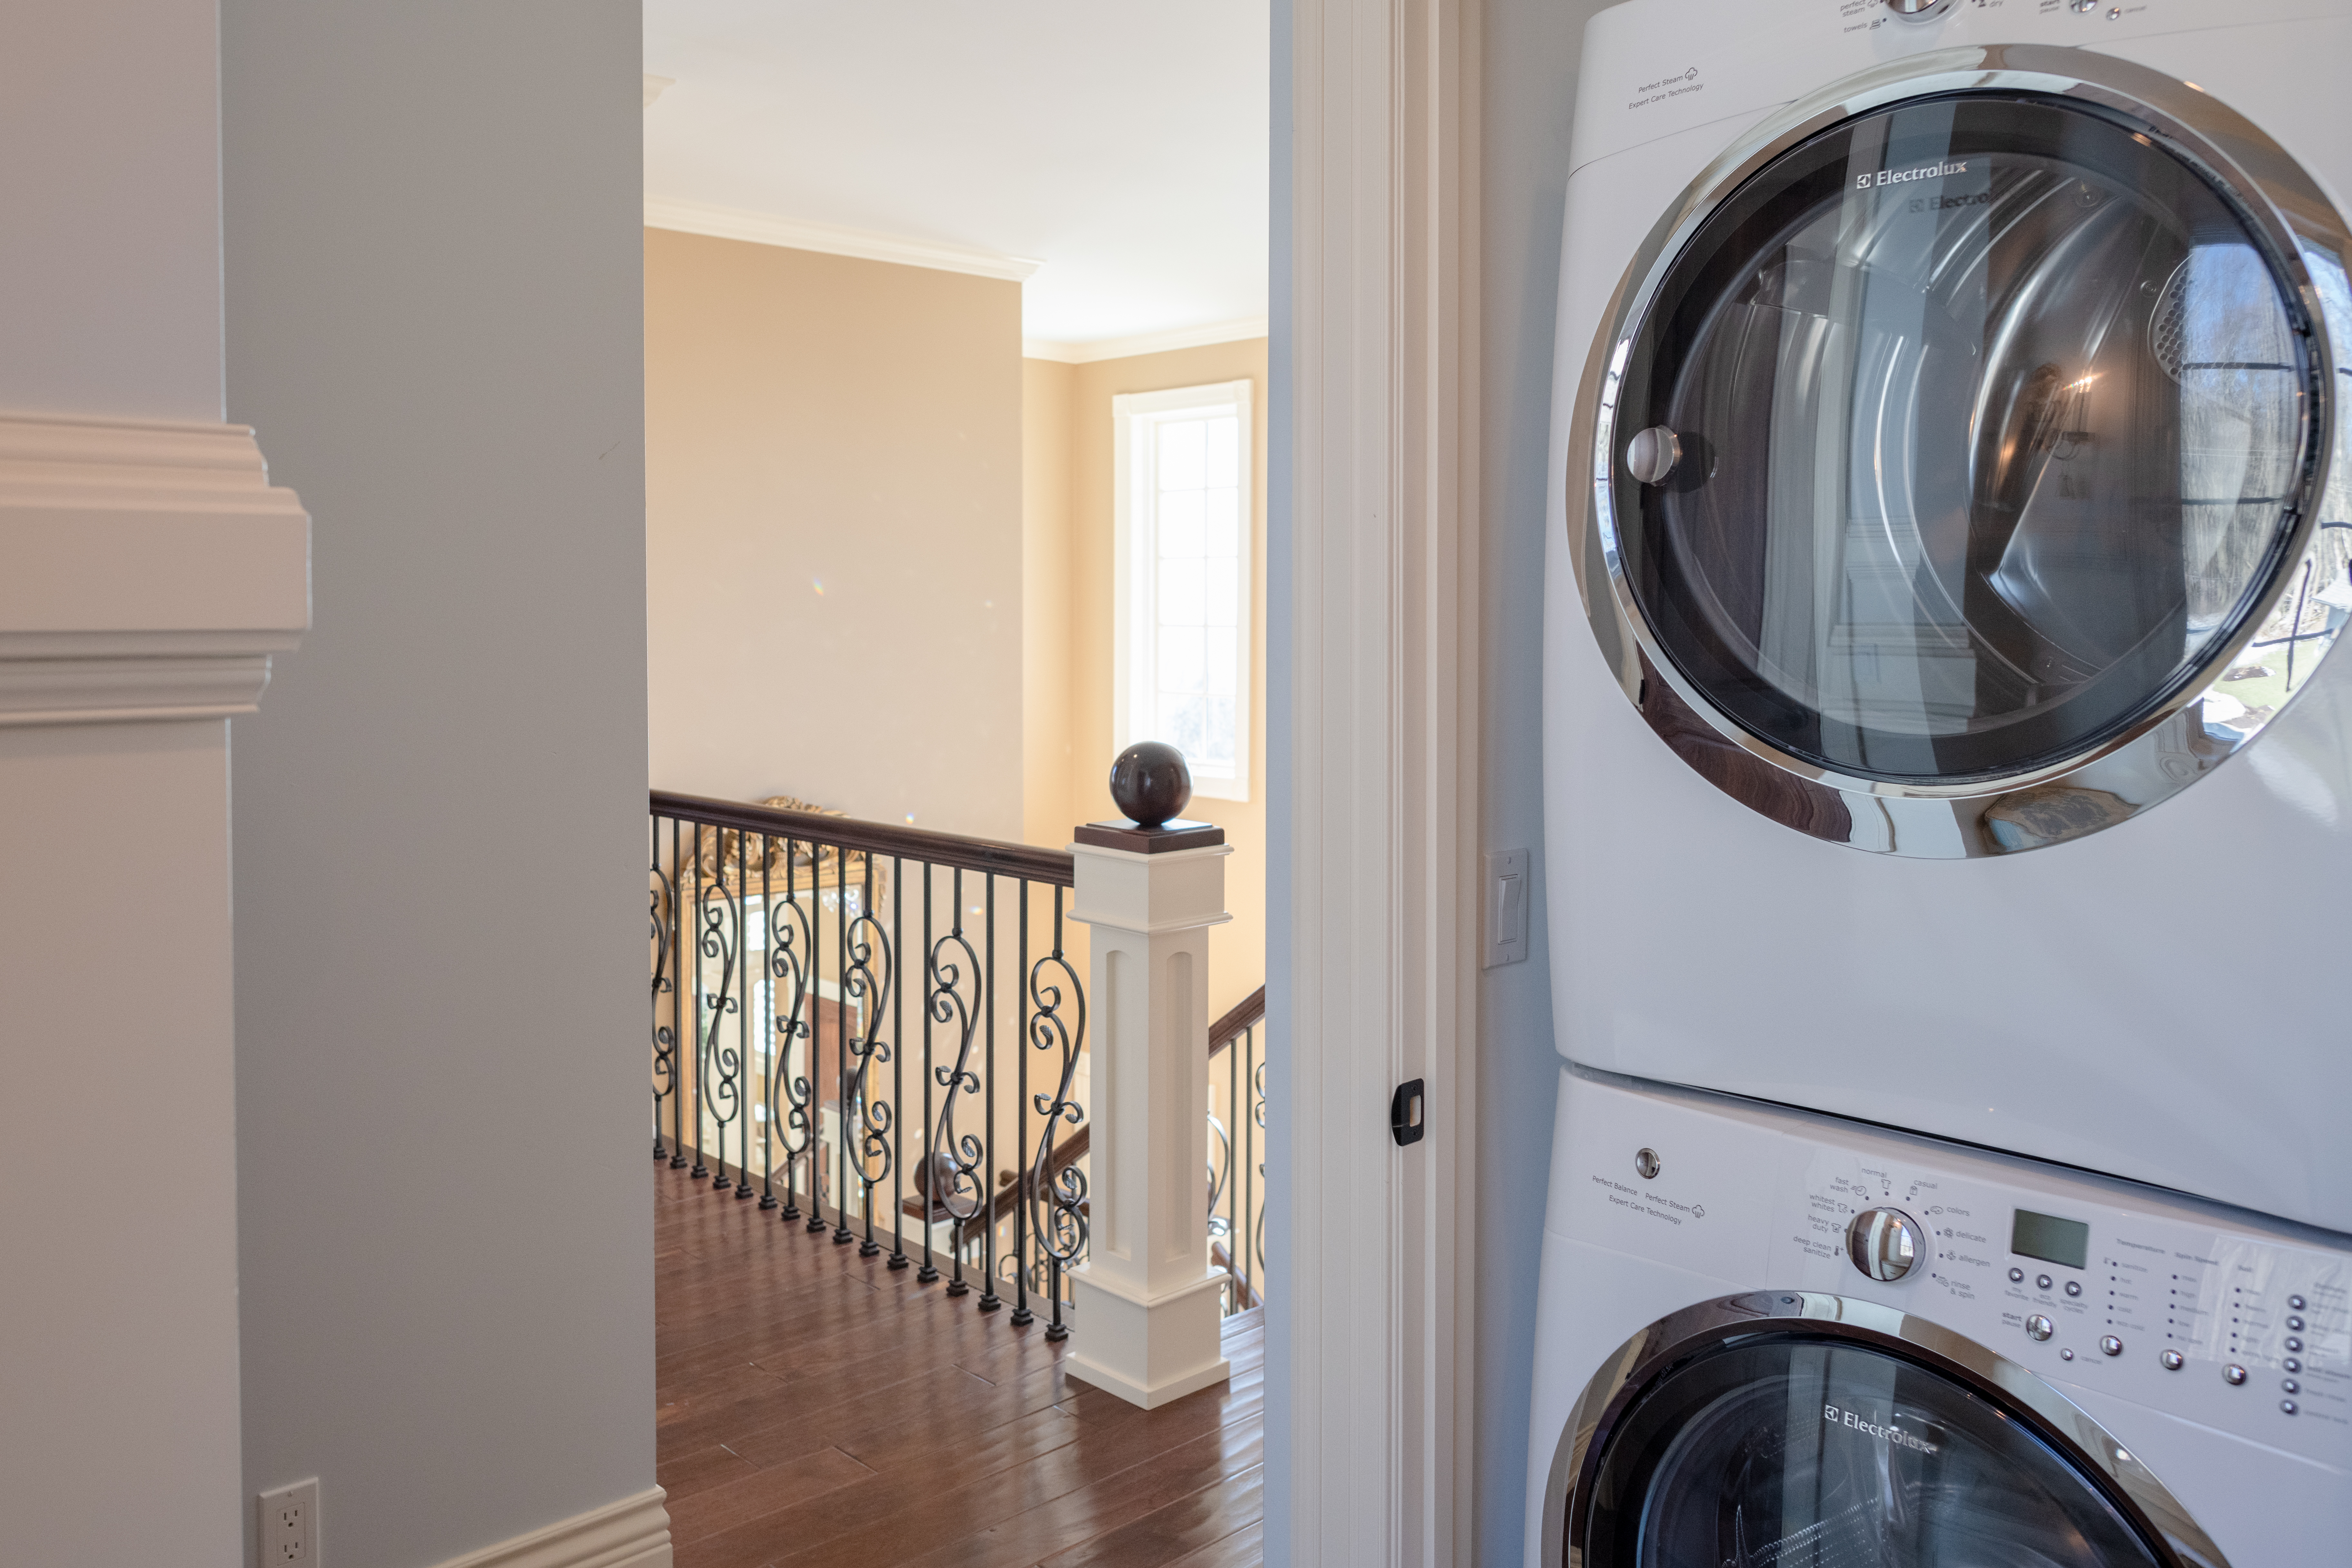 Second floor washer and dryer.